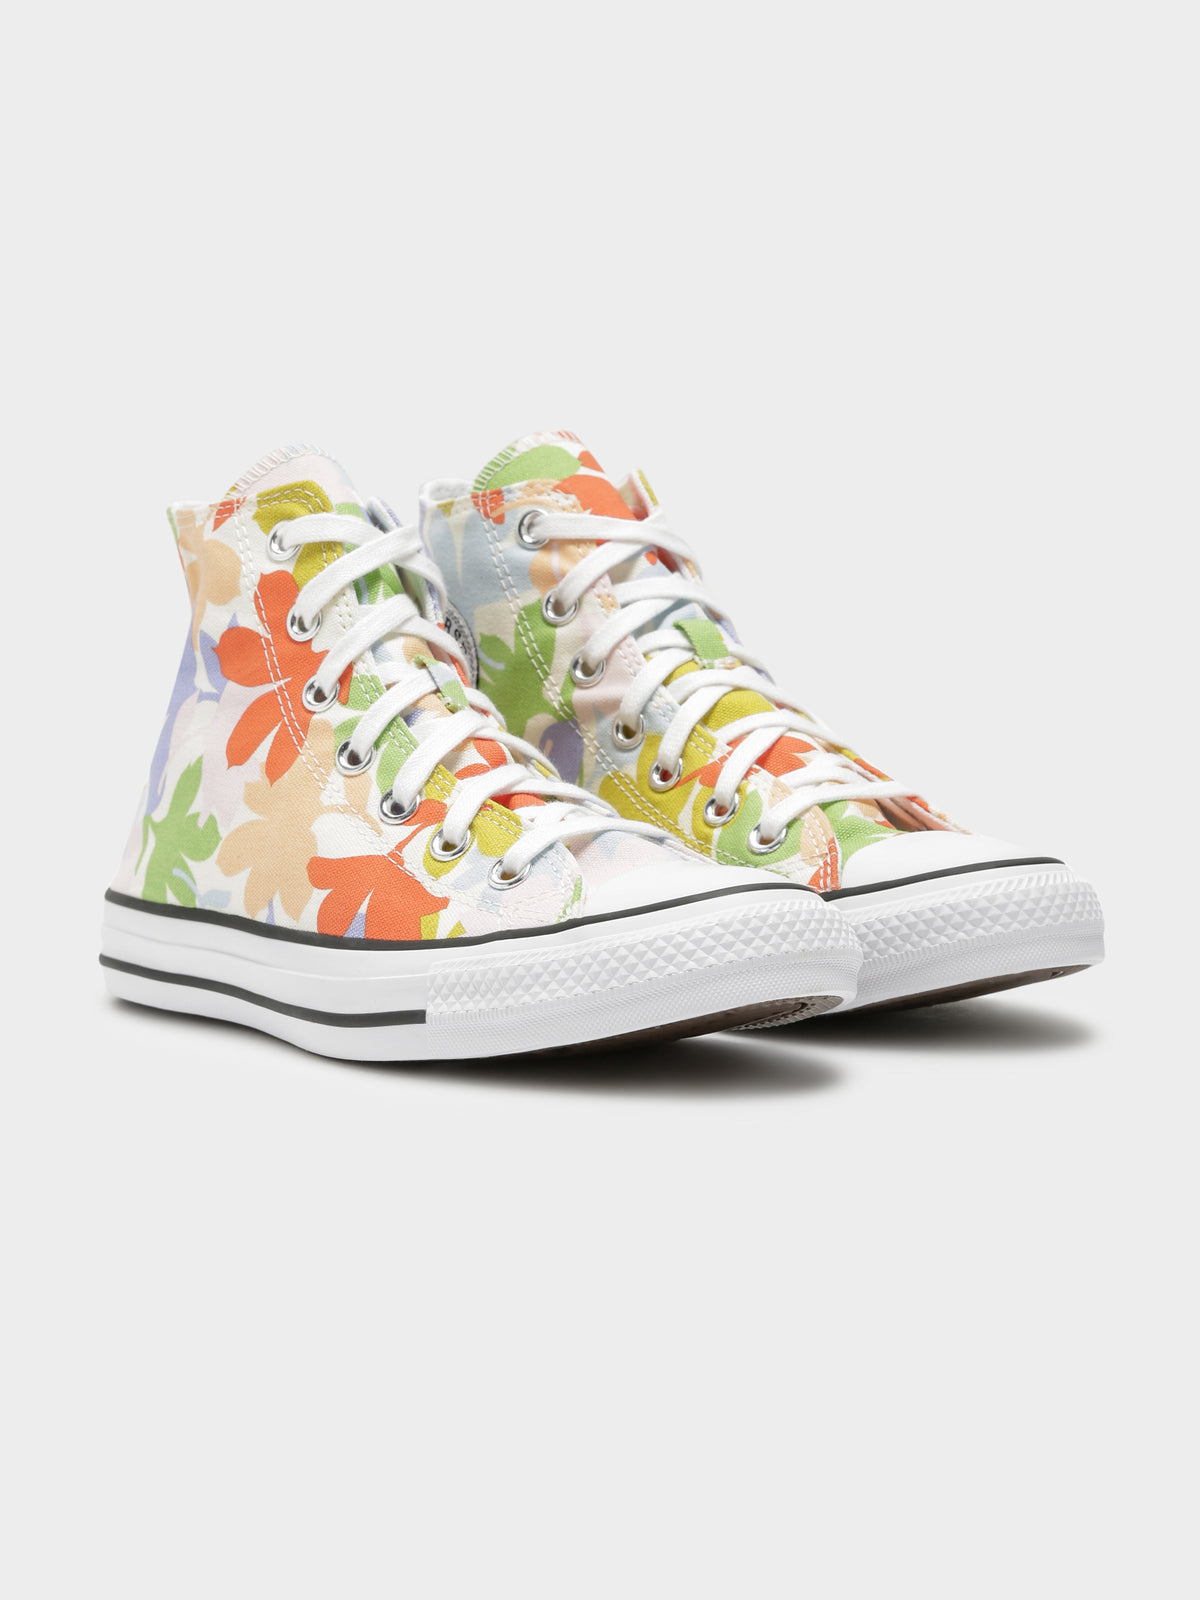 Womens Chuck Taylor All Star High Tops in Garden Party All Over